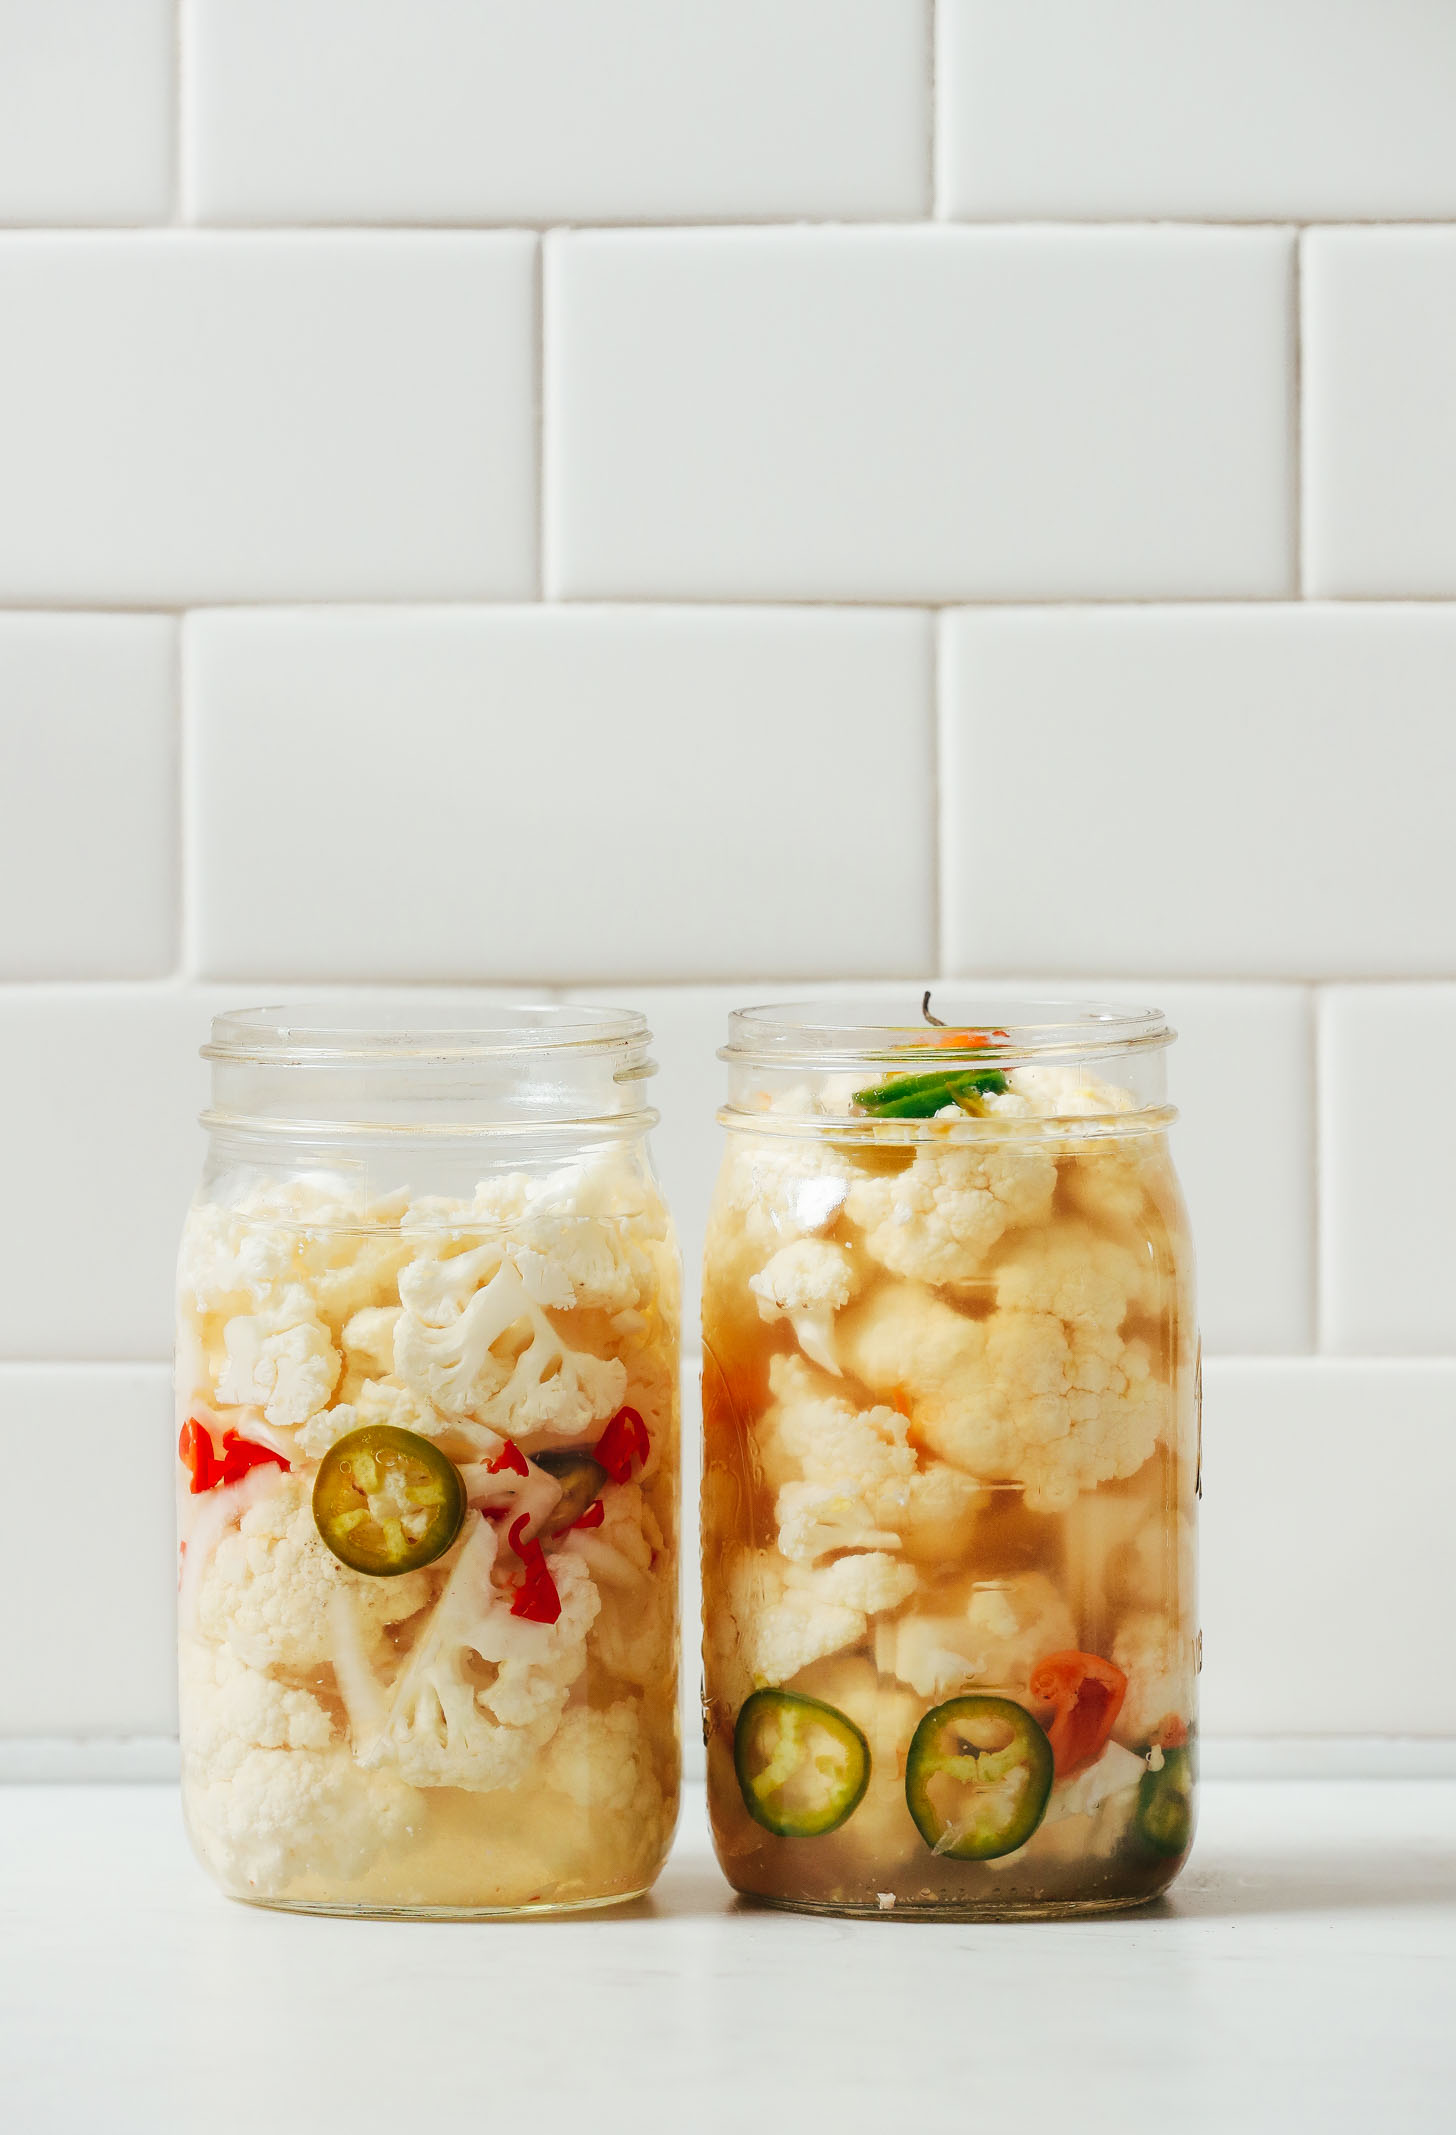 Sliced spicy peppers in a jar with Pickled Cauliflower to make Escabeche